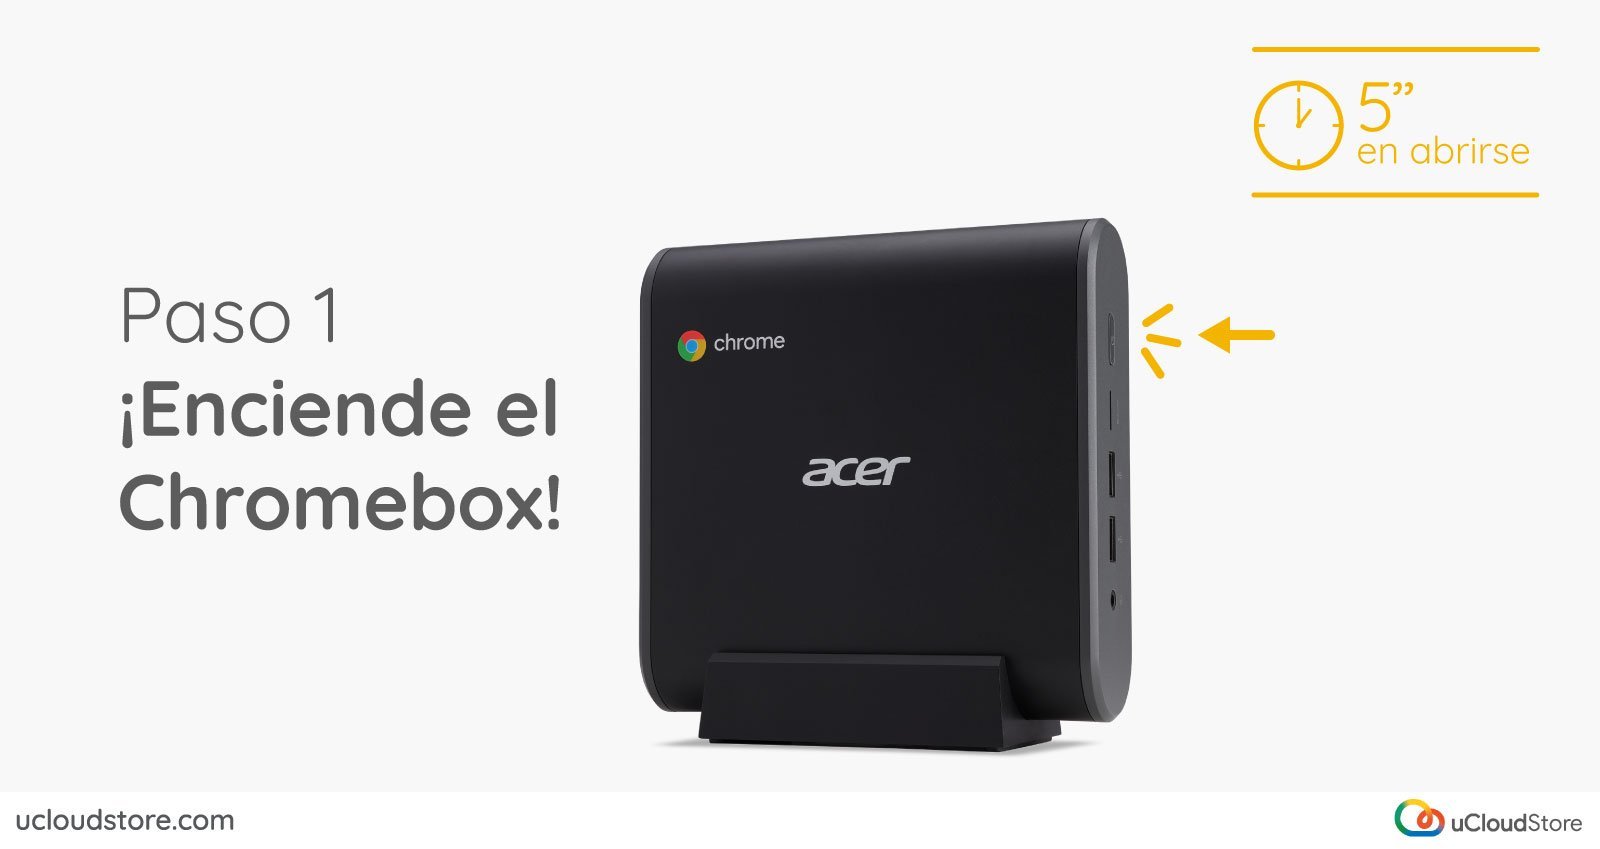 Image of how to turn on the chromebox